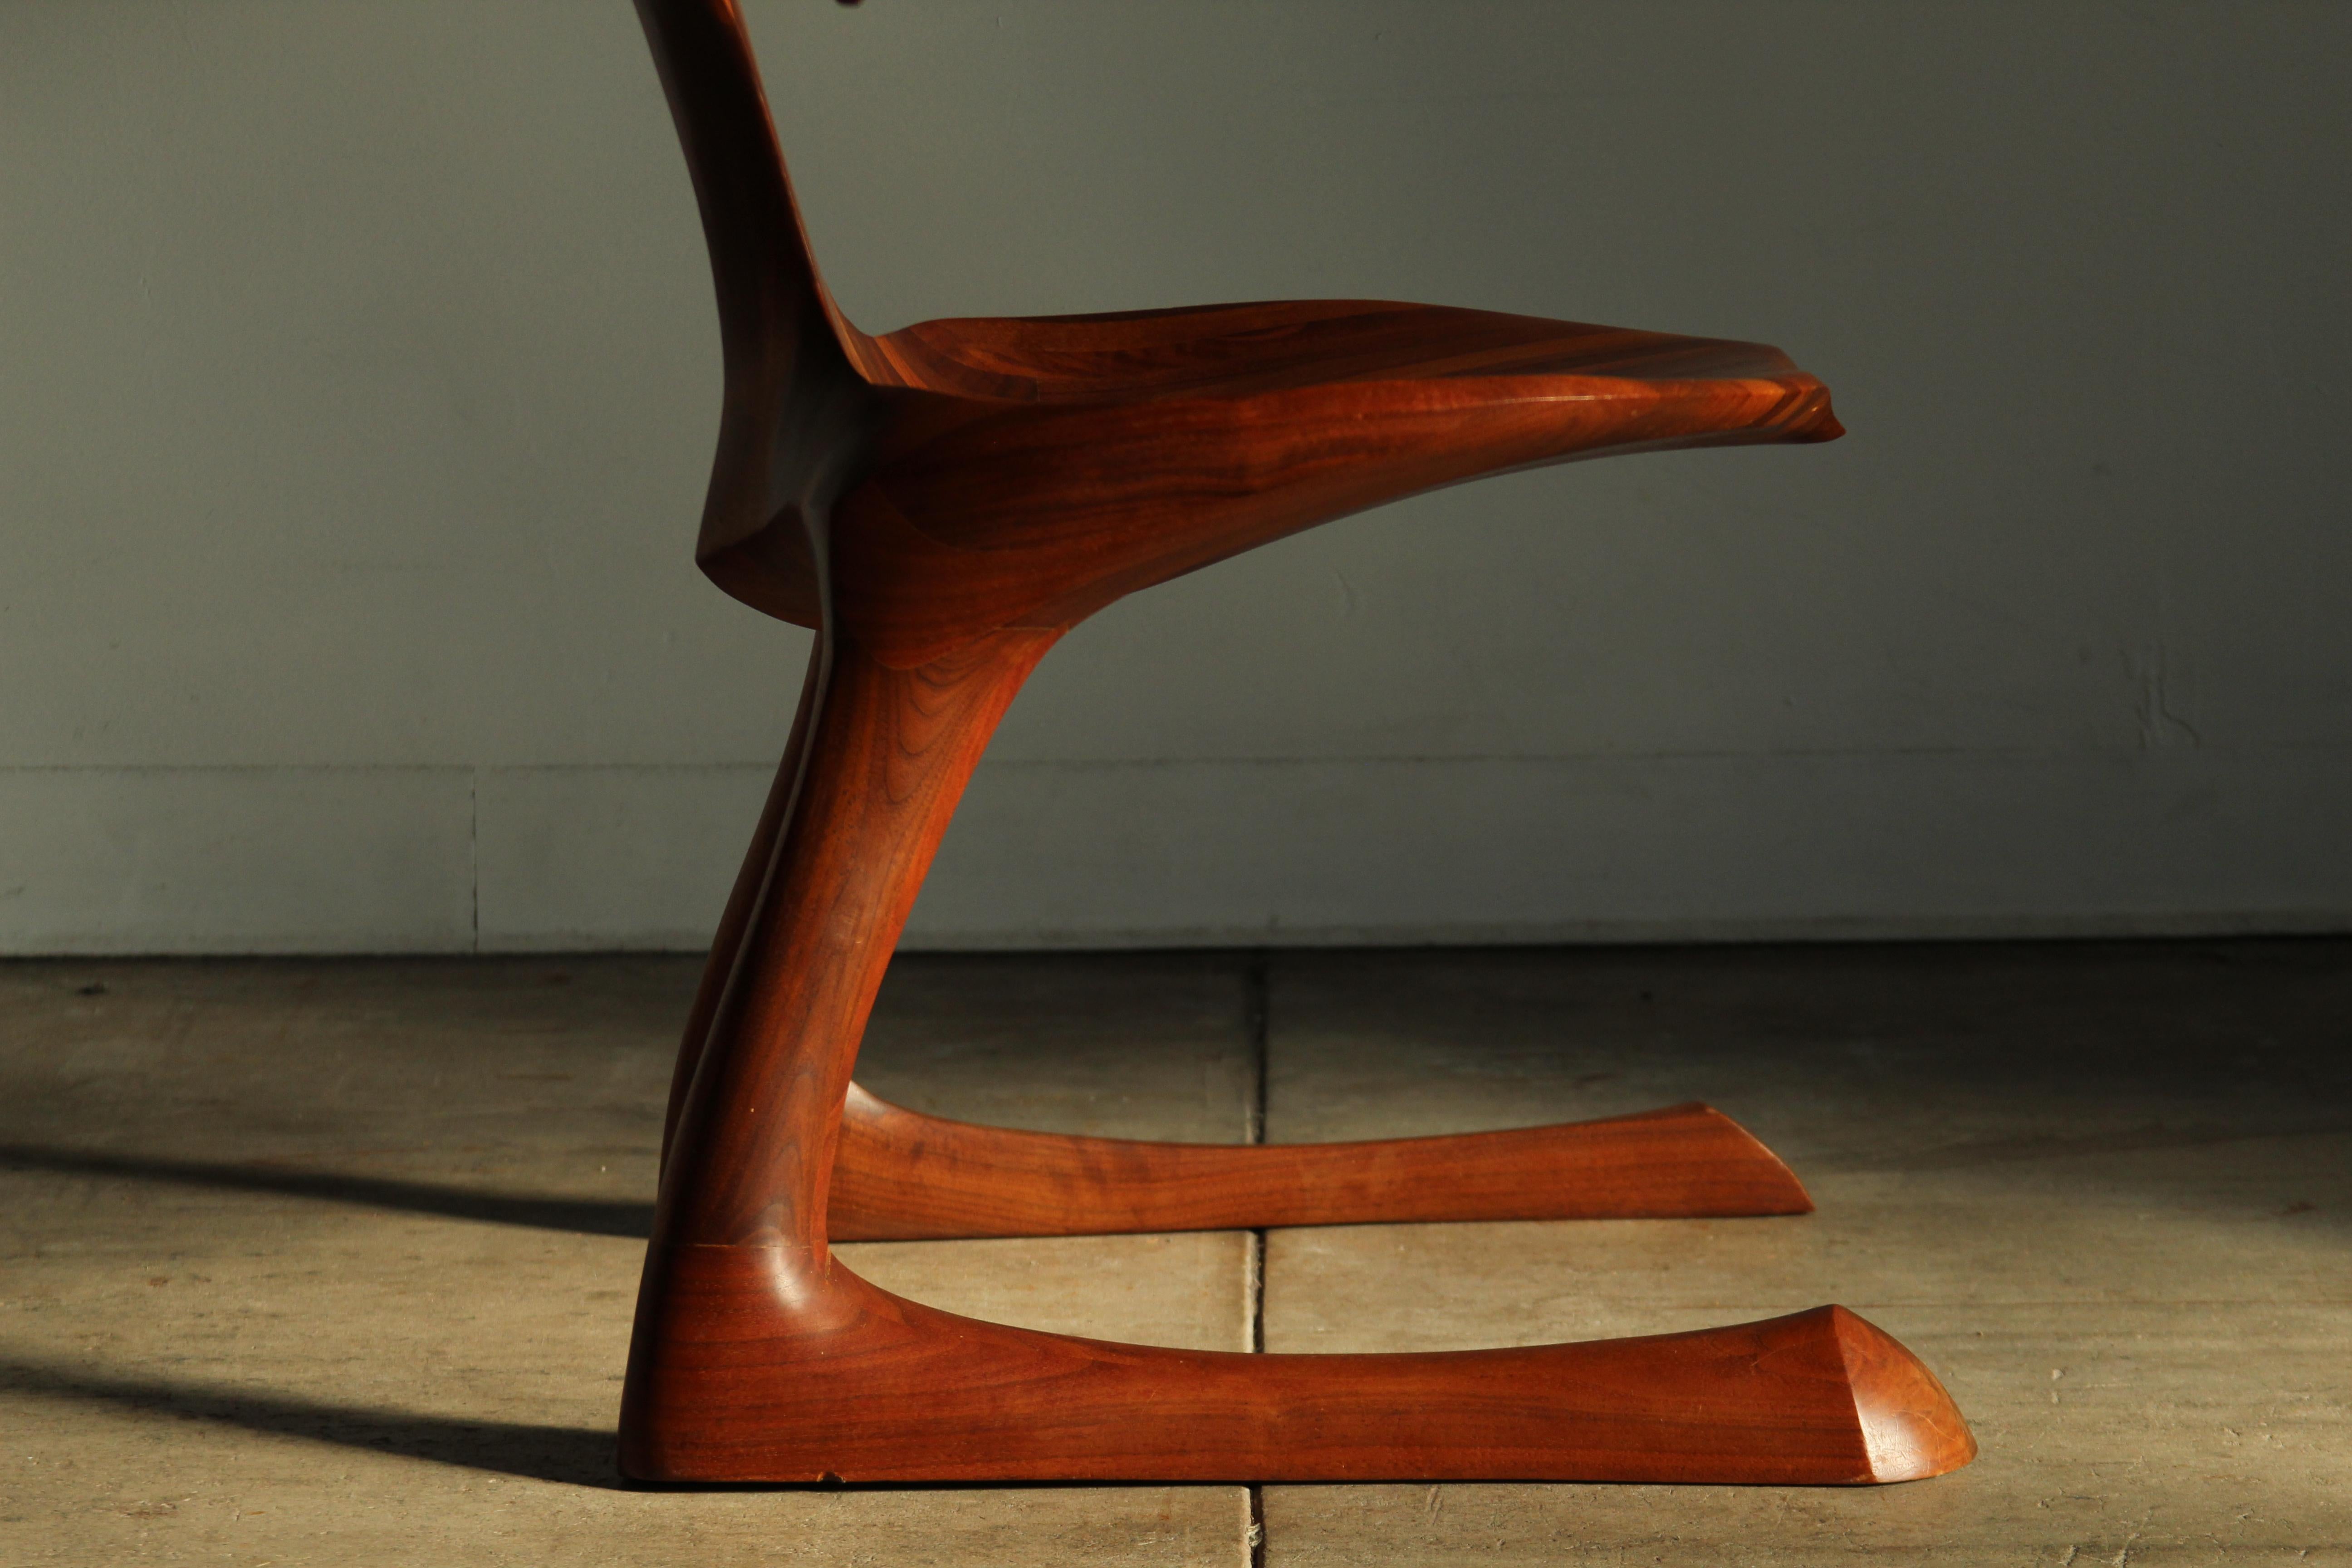 American Sculpted Walnut California Studio Craft Chair Attributed to Larry Hunter, 1980